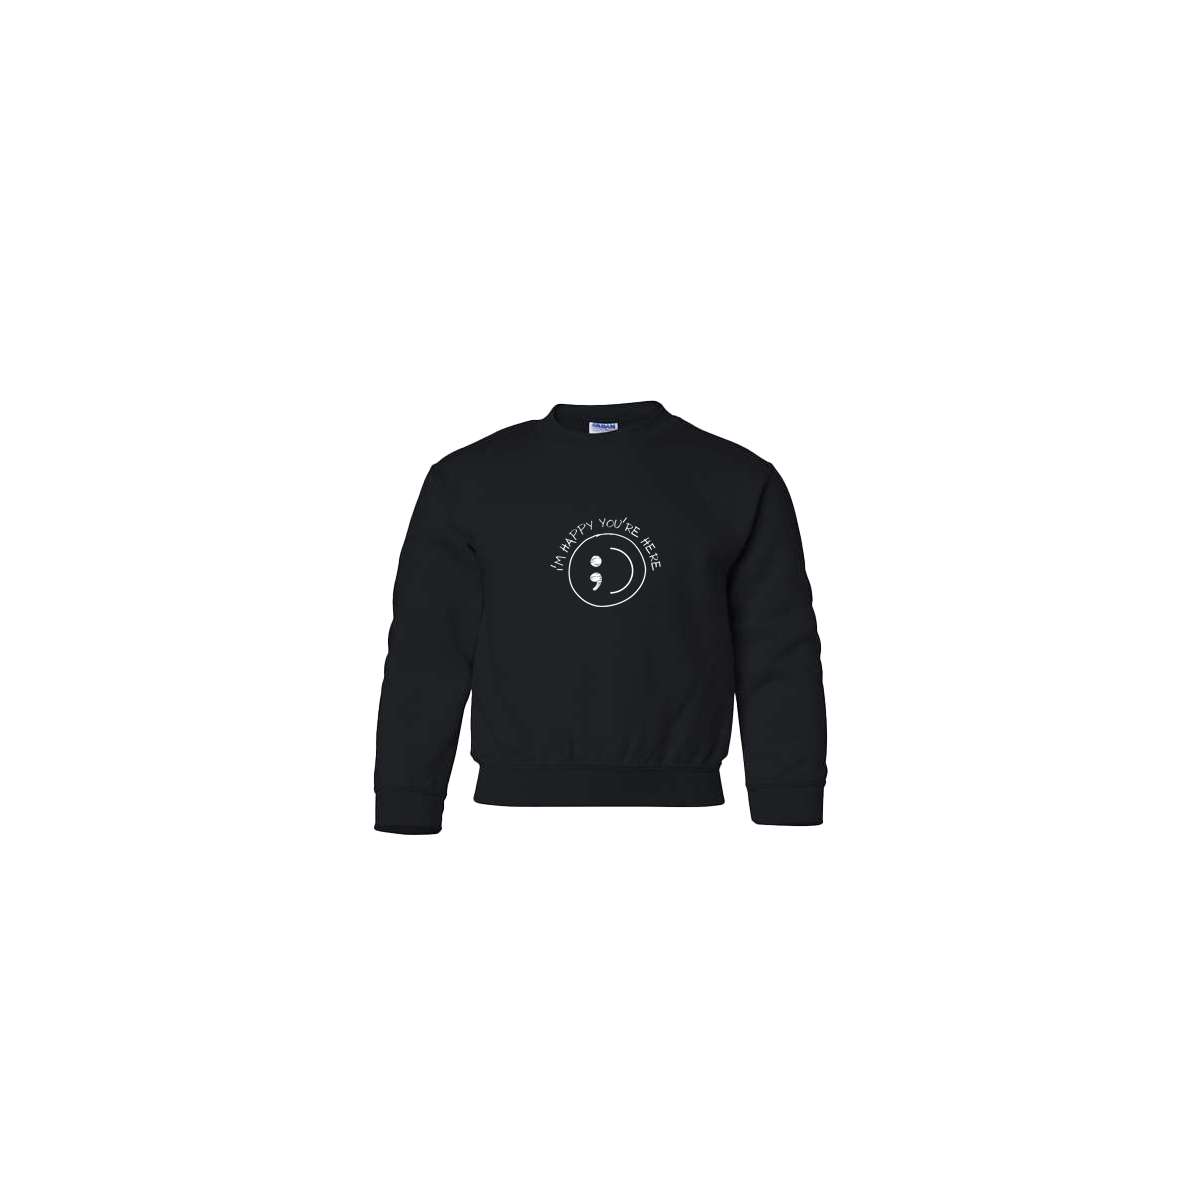 I'm Happy You're Here Embroidered Black Youth Crewneck